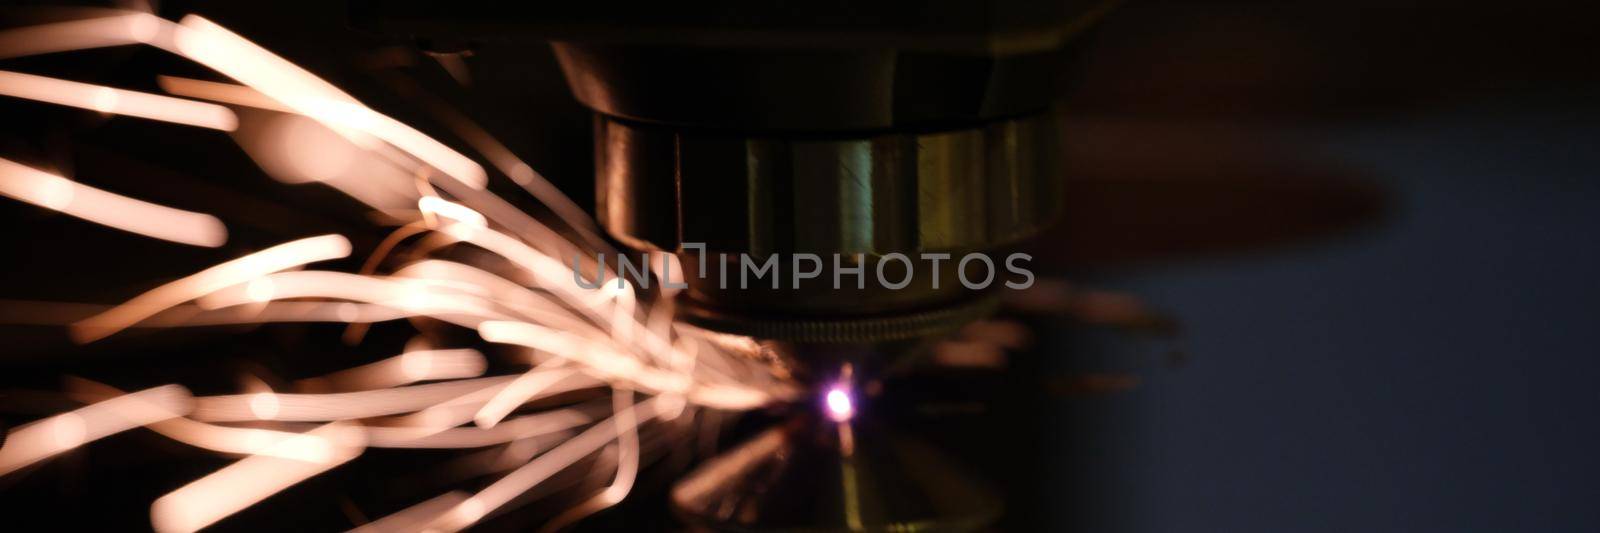 Laser machine cutting metal sheet with sparks blurred background. Metalworking concept